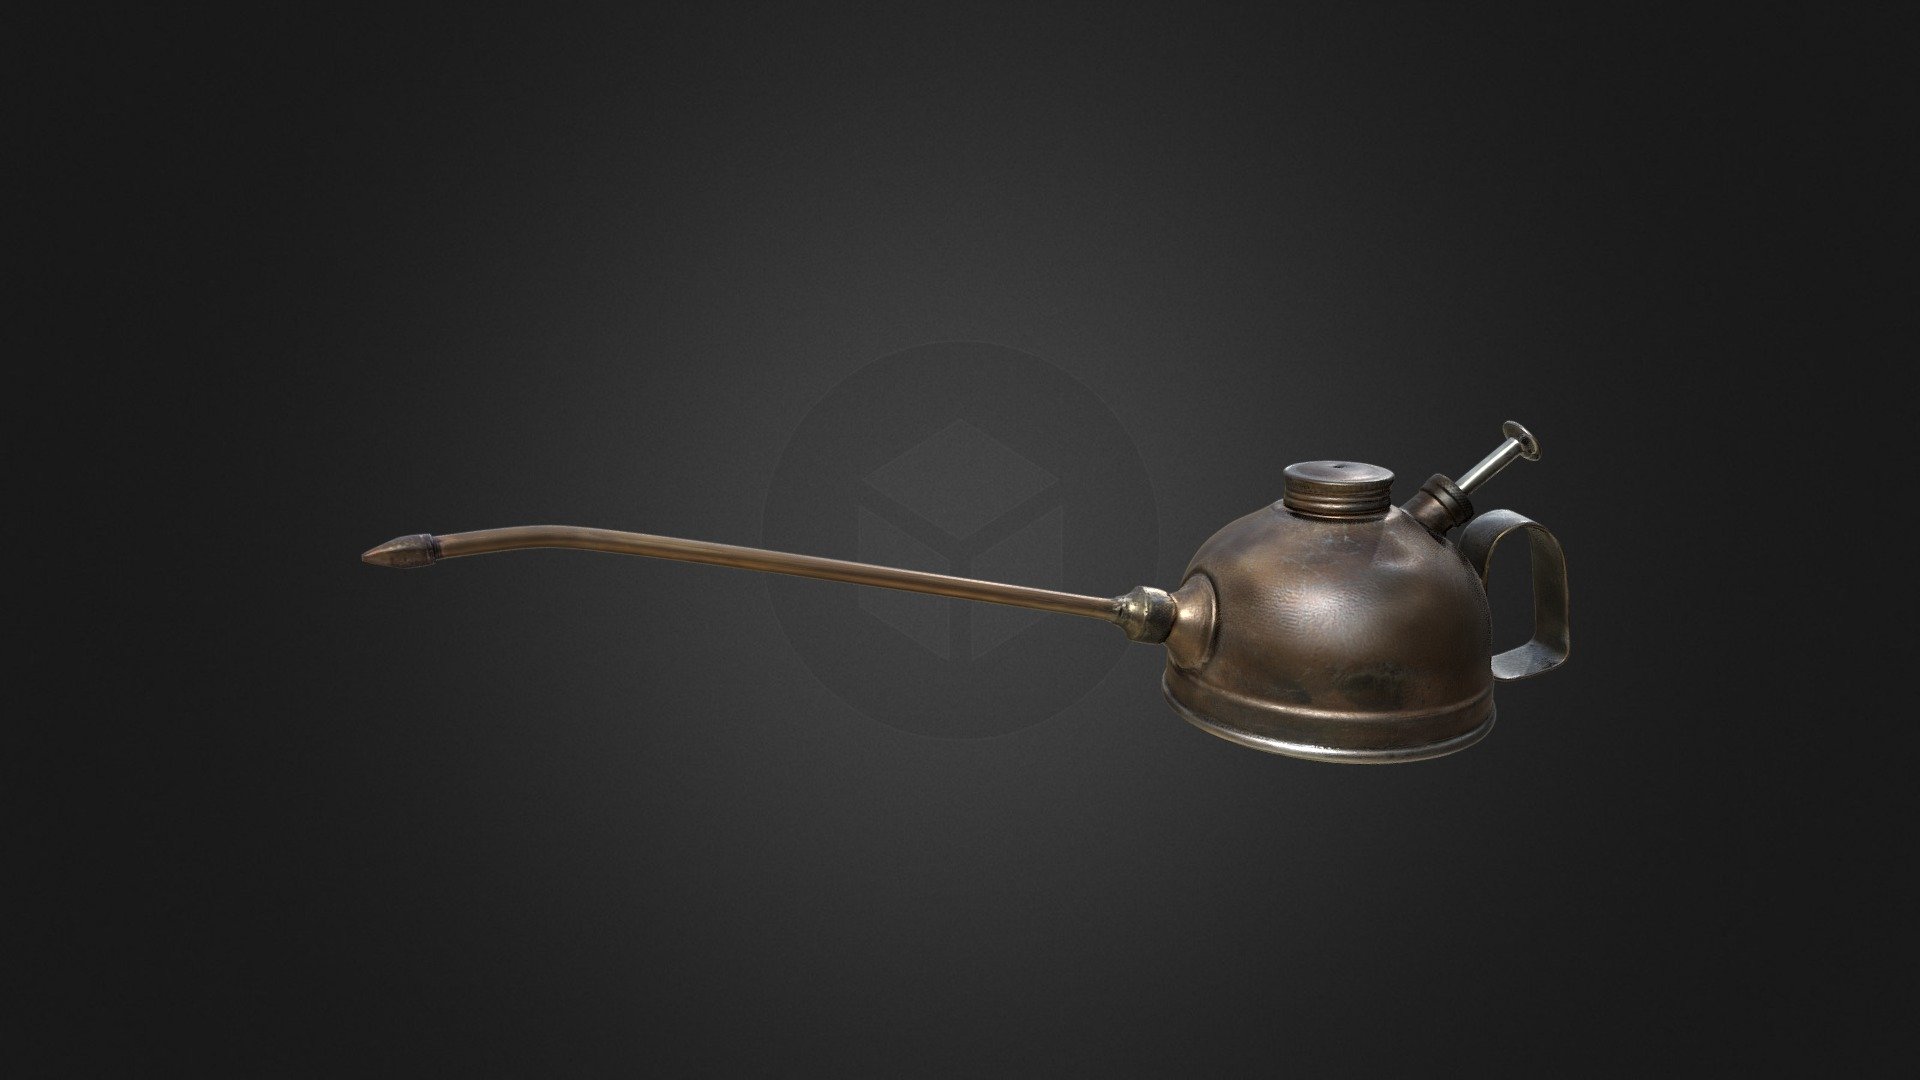 Old oil can, mechanical workshop tool.
Scanned and optimized in 3D, both mesh and textures 3d model